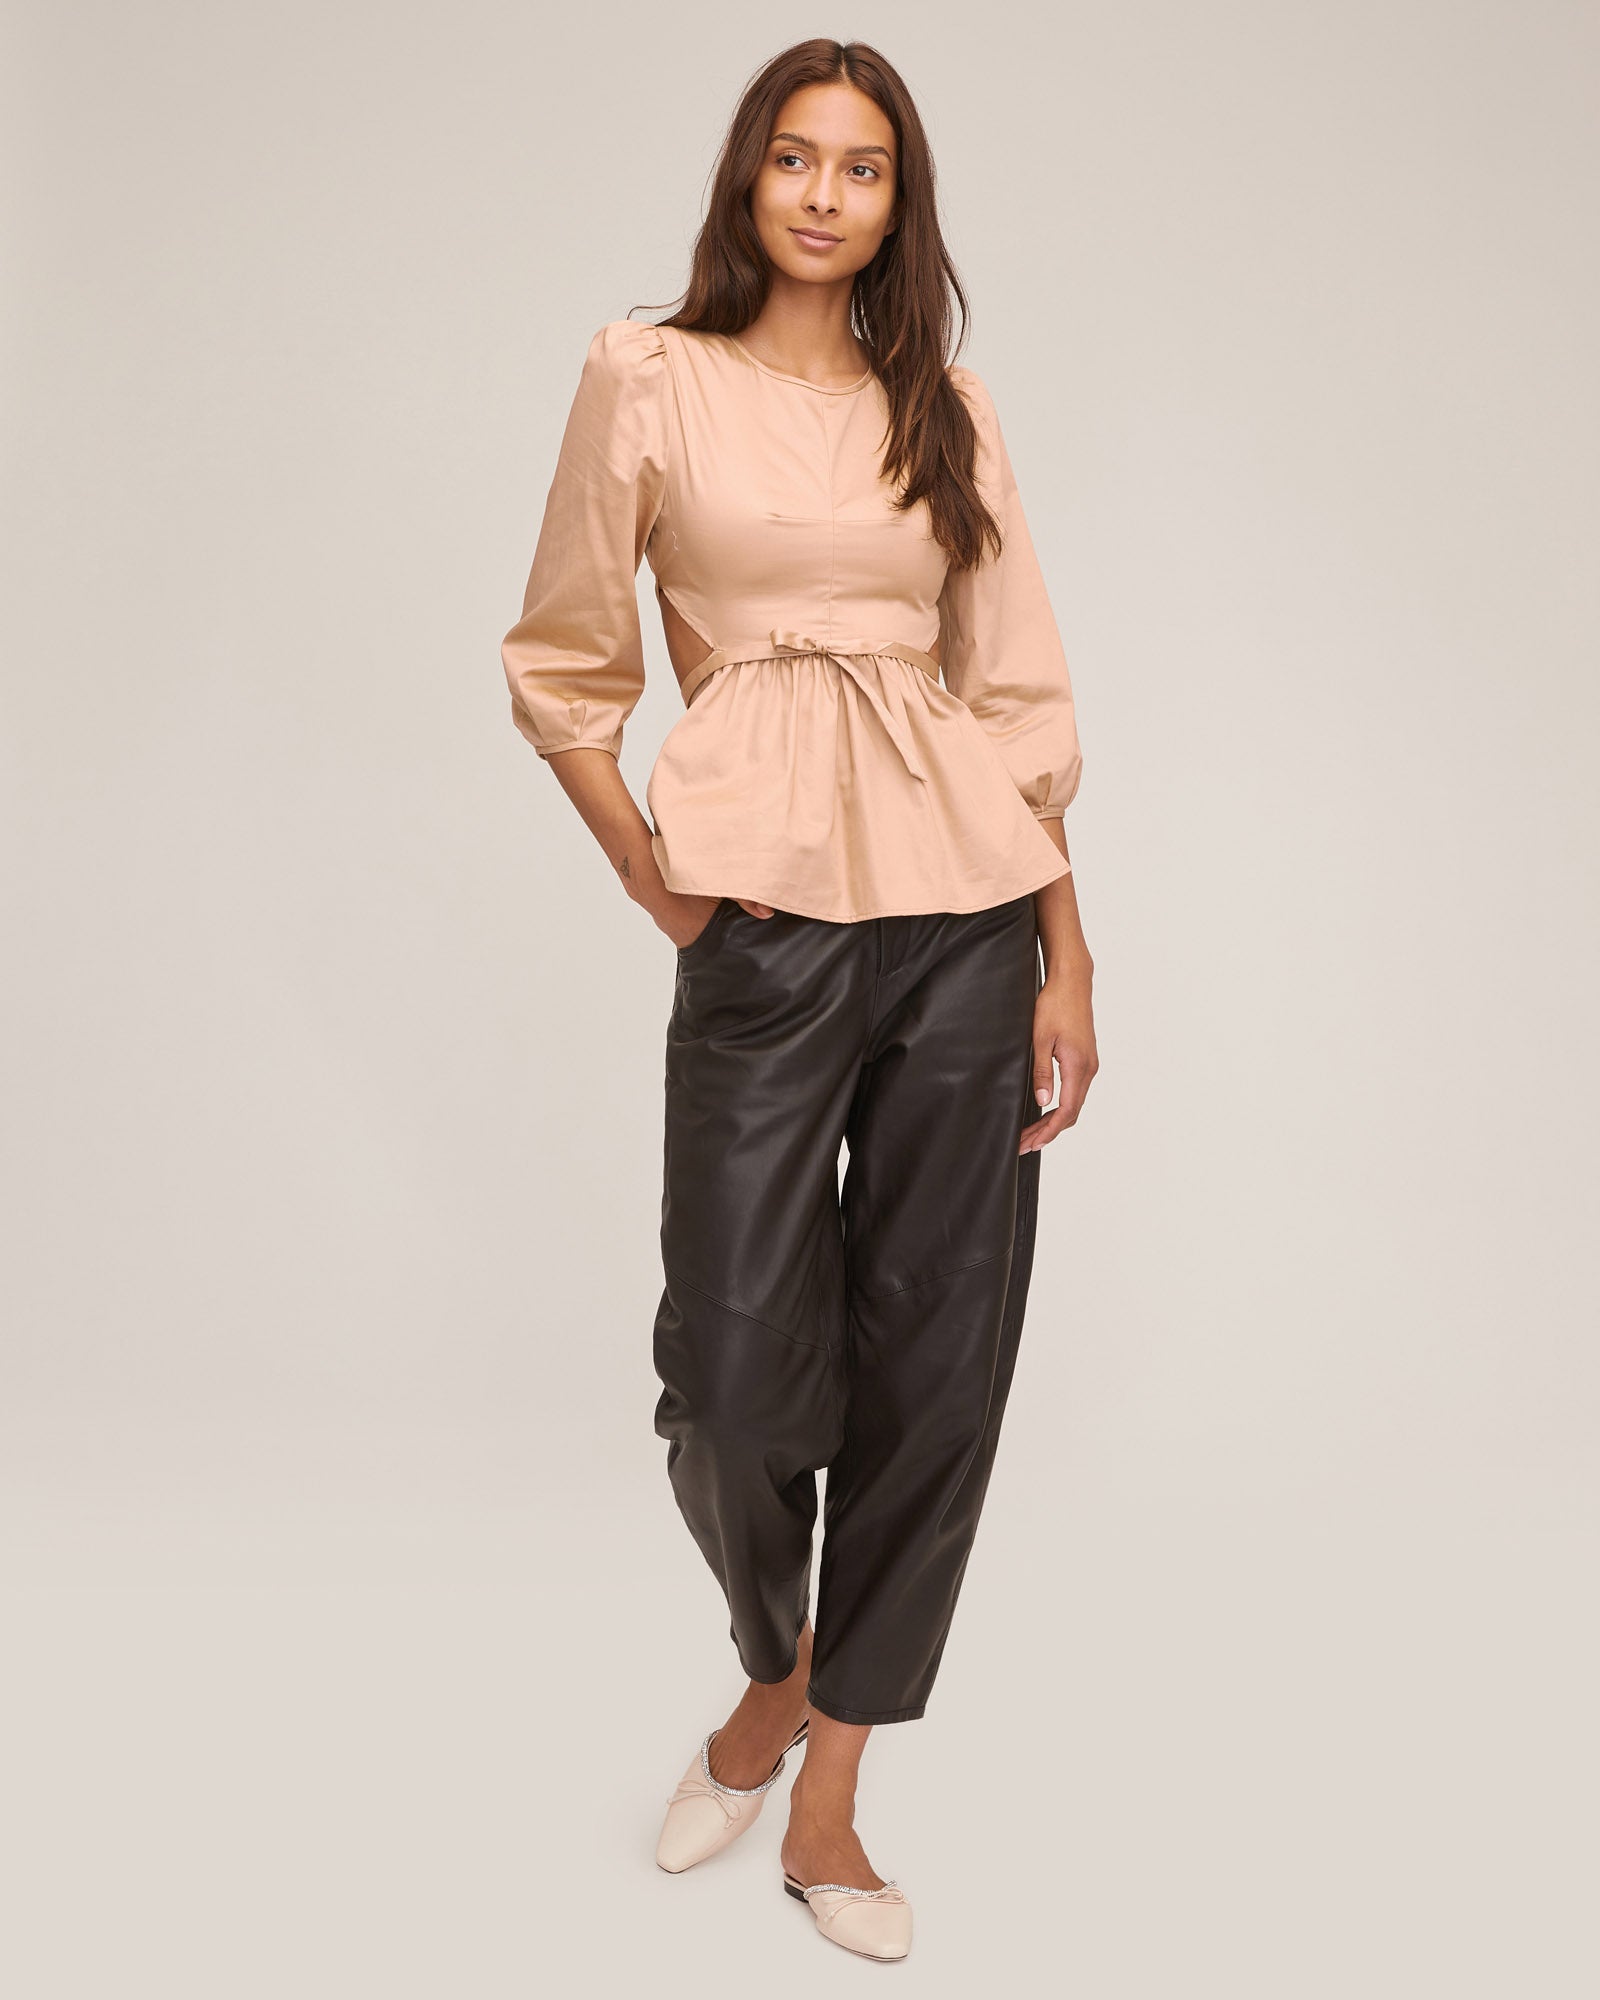 Faux Leather Kick-Flare Trousers by Marissa Webb Collective for $60